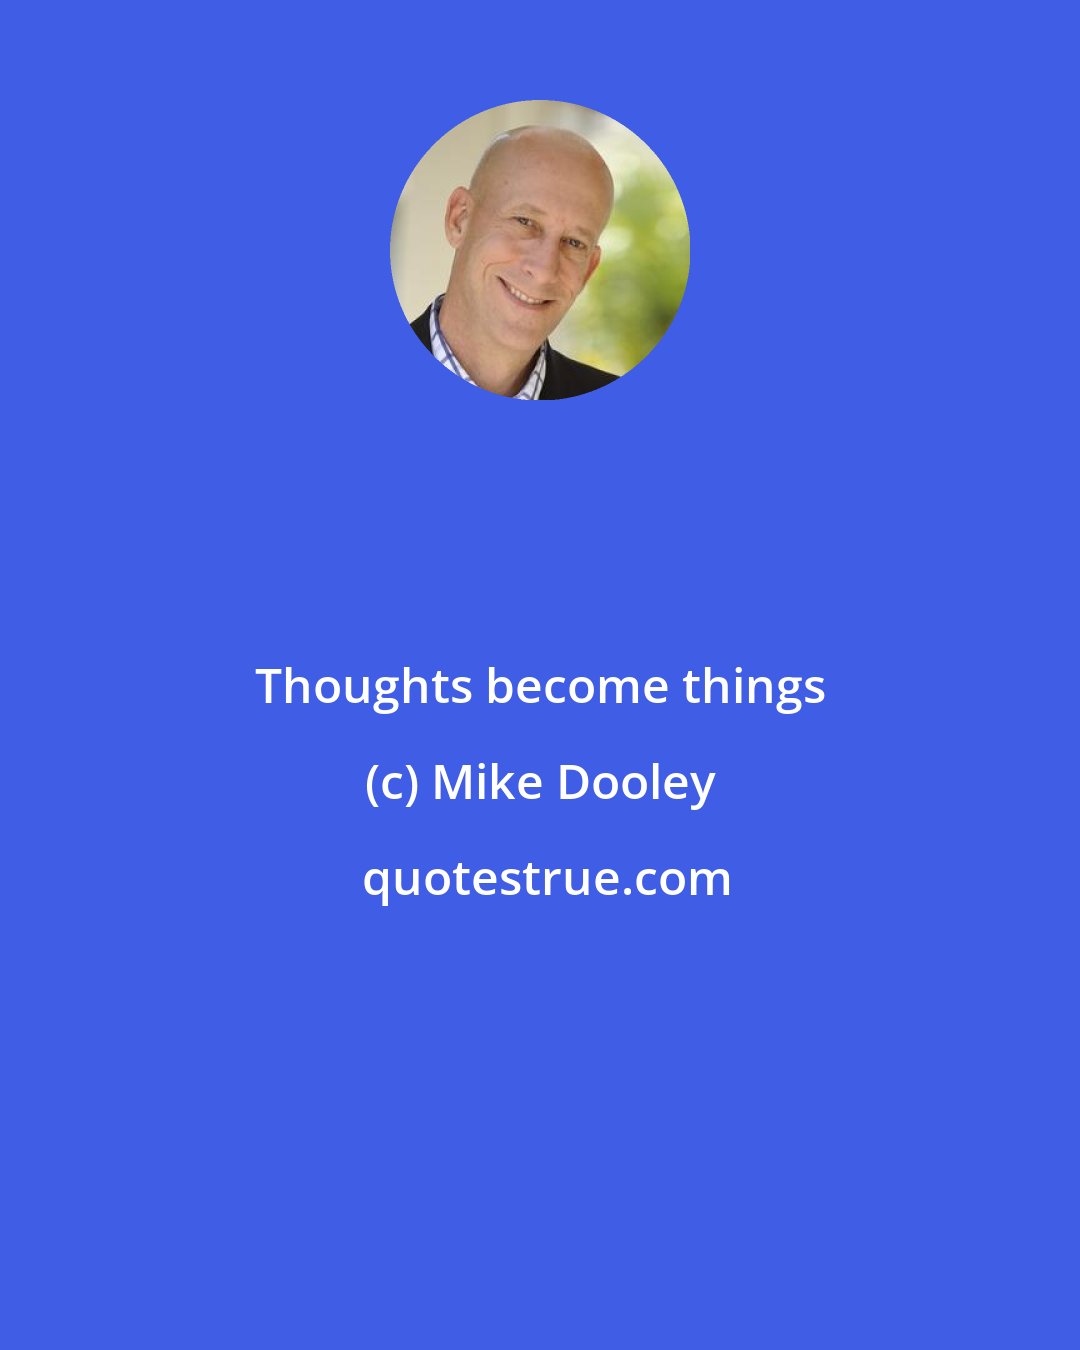 Mike Dooley: Thoughts become things